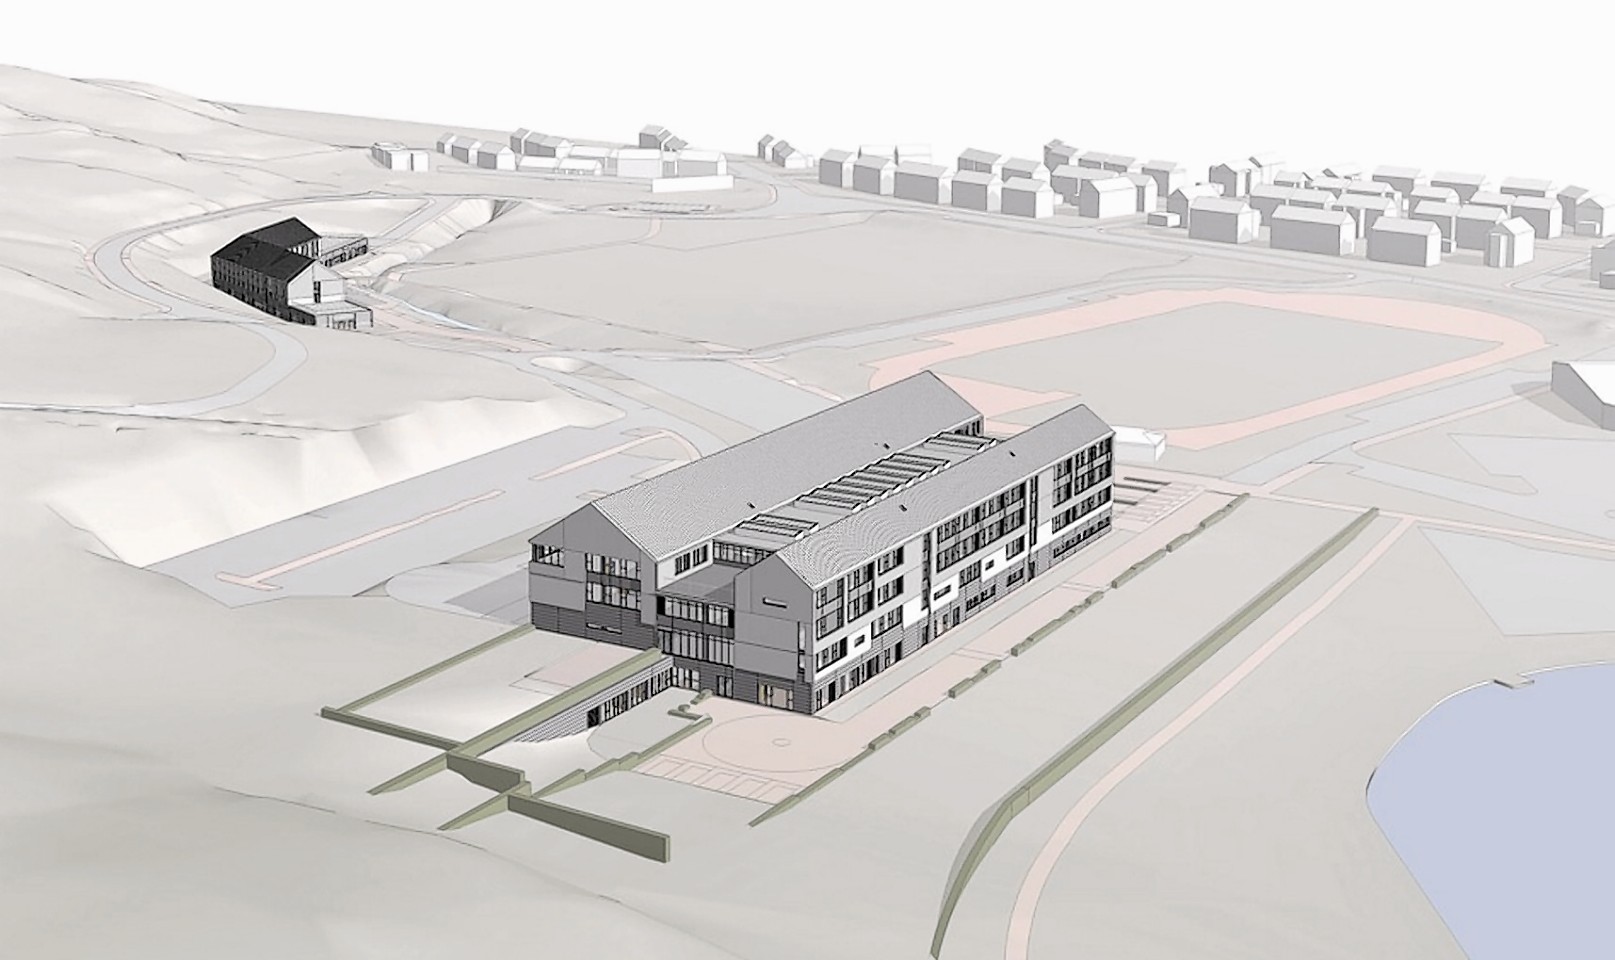 The plans unveiled for the new Anderson High School which were meant to be finished in 2016